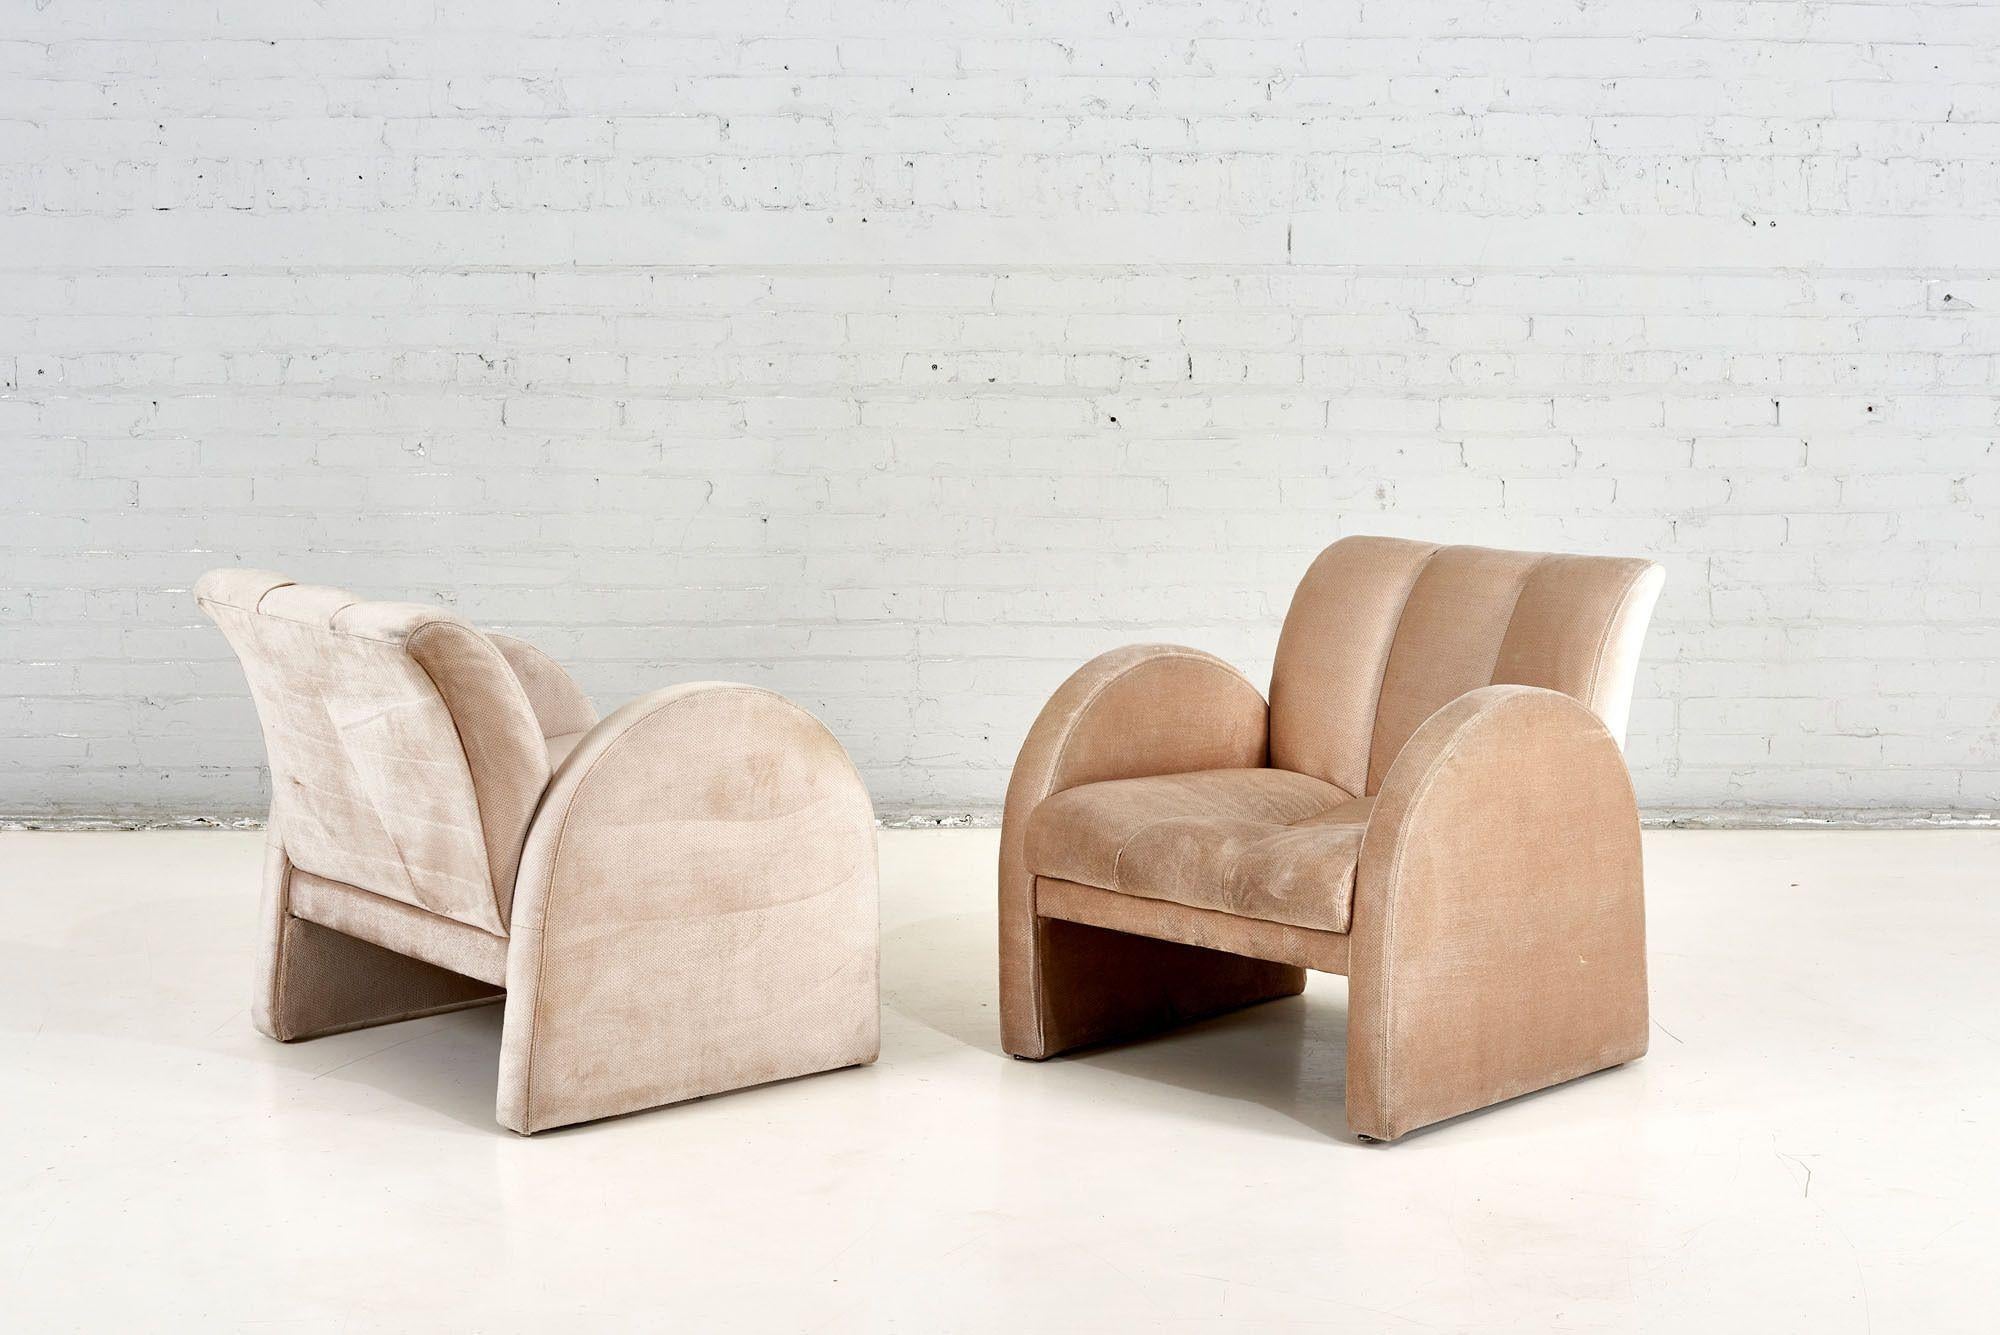 Late 20th Century Pair Preview Lounge Chairs, 1970 For Sale